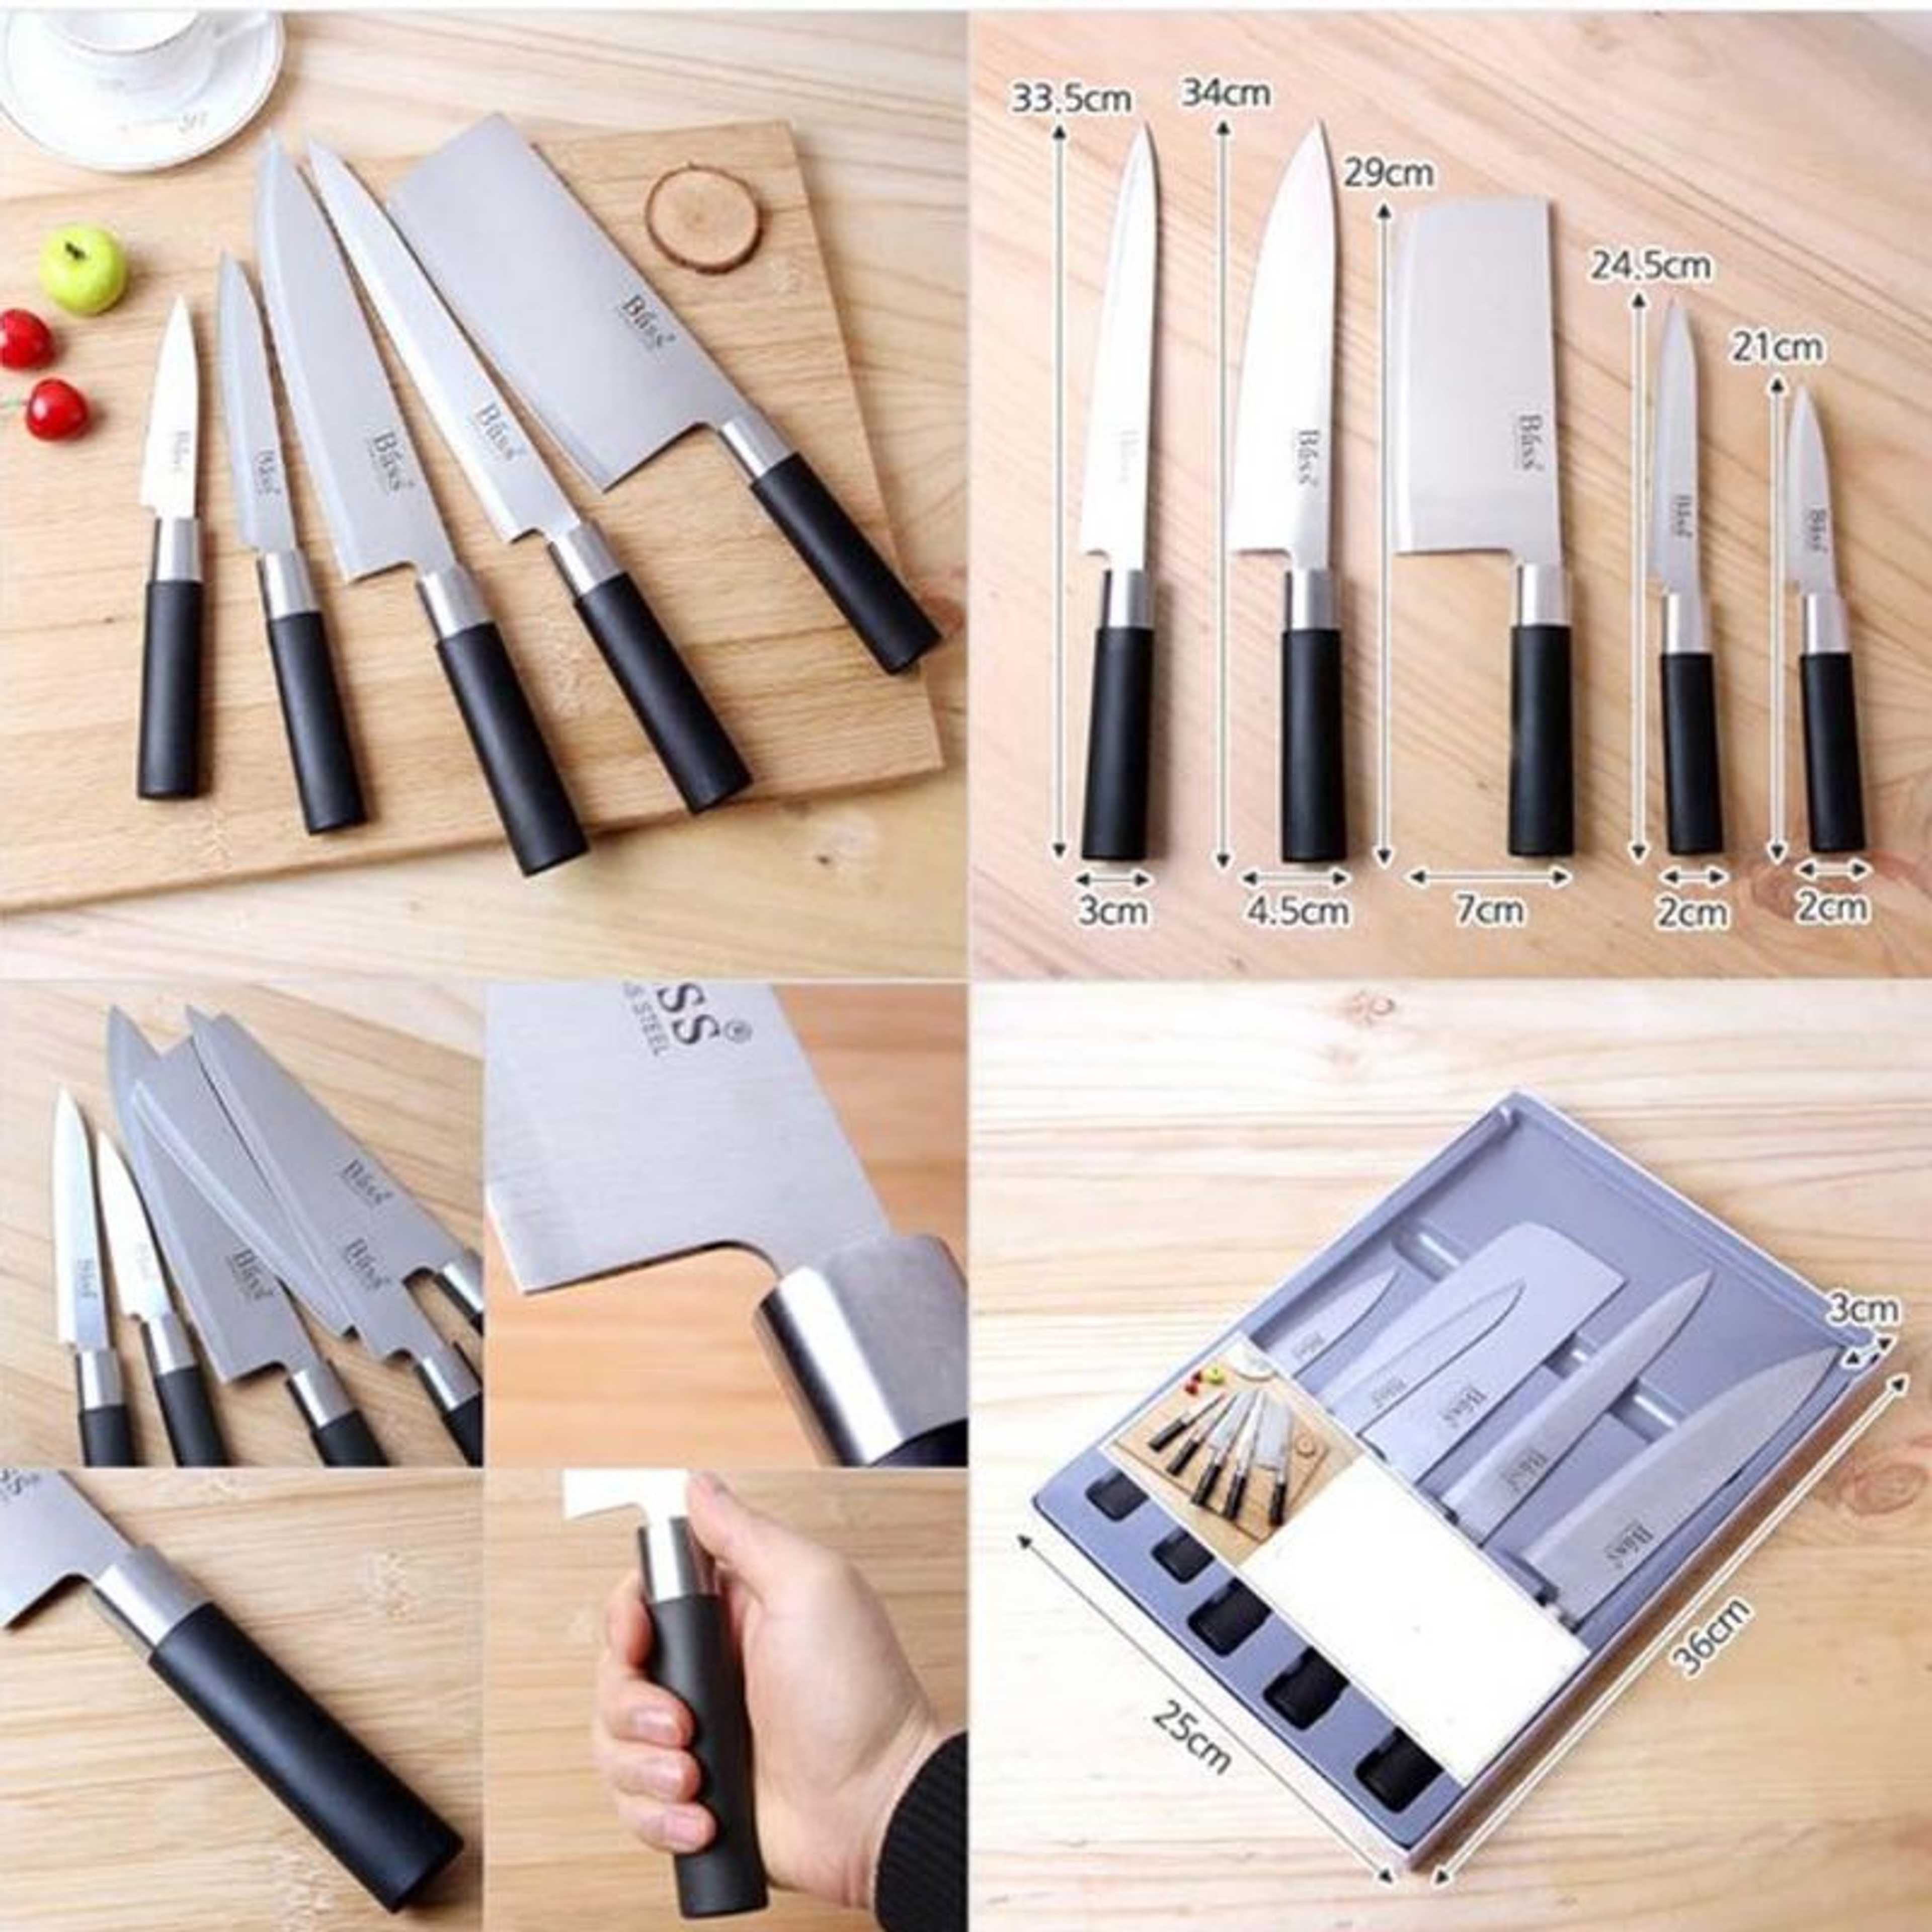 5 PIECES BASS STAINLESS KNIVES SET